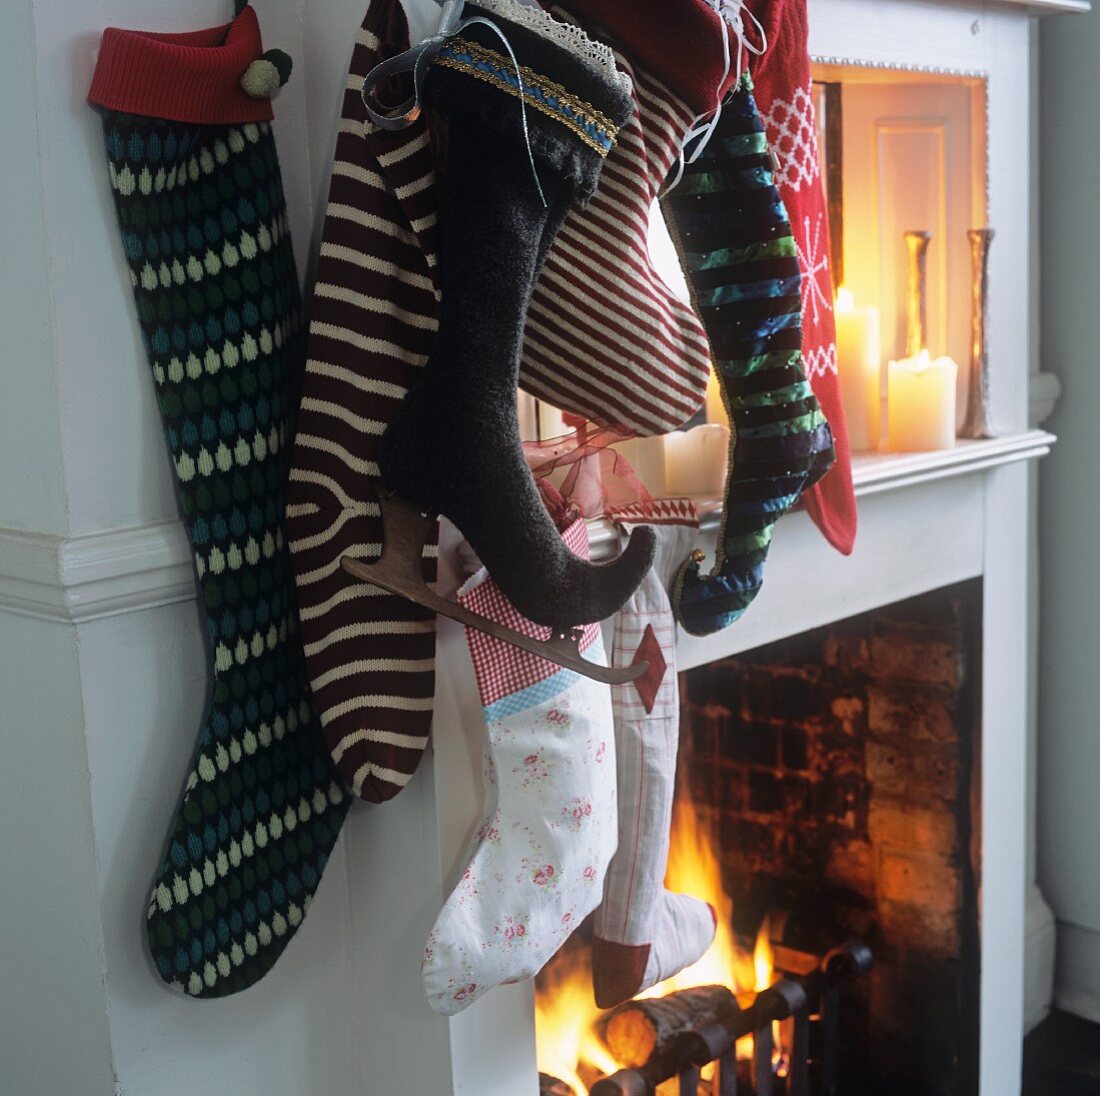 A collection of Christmas stockings hanging next to a fireplace